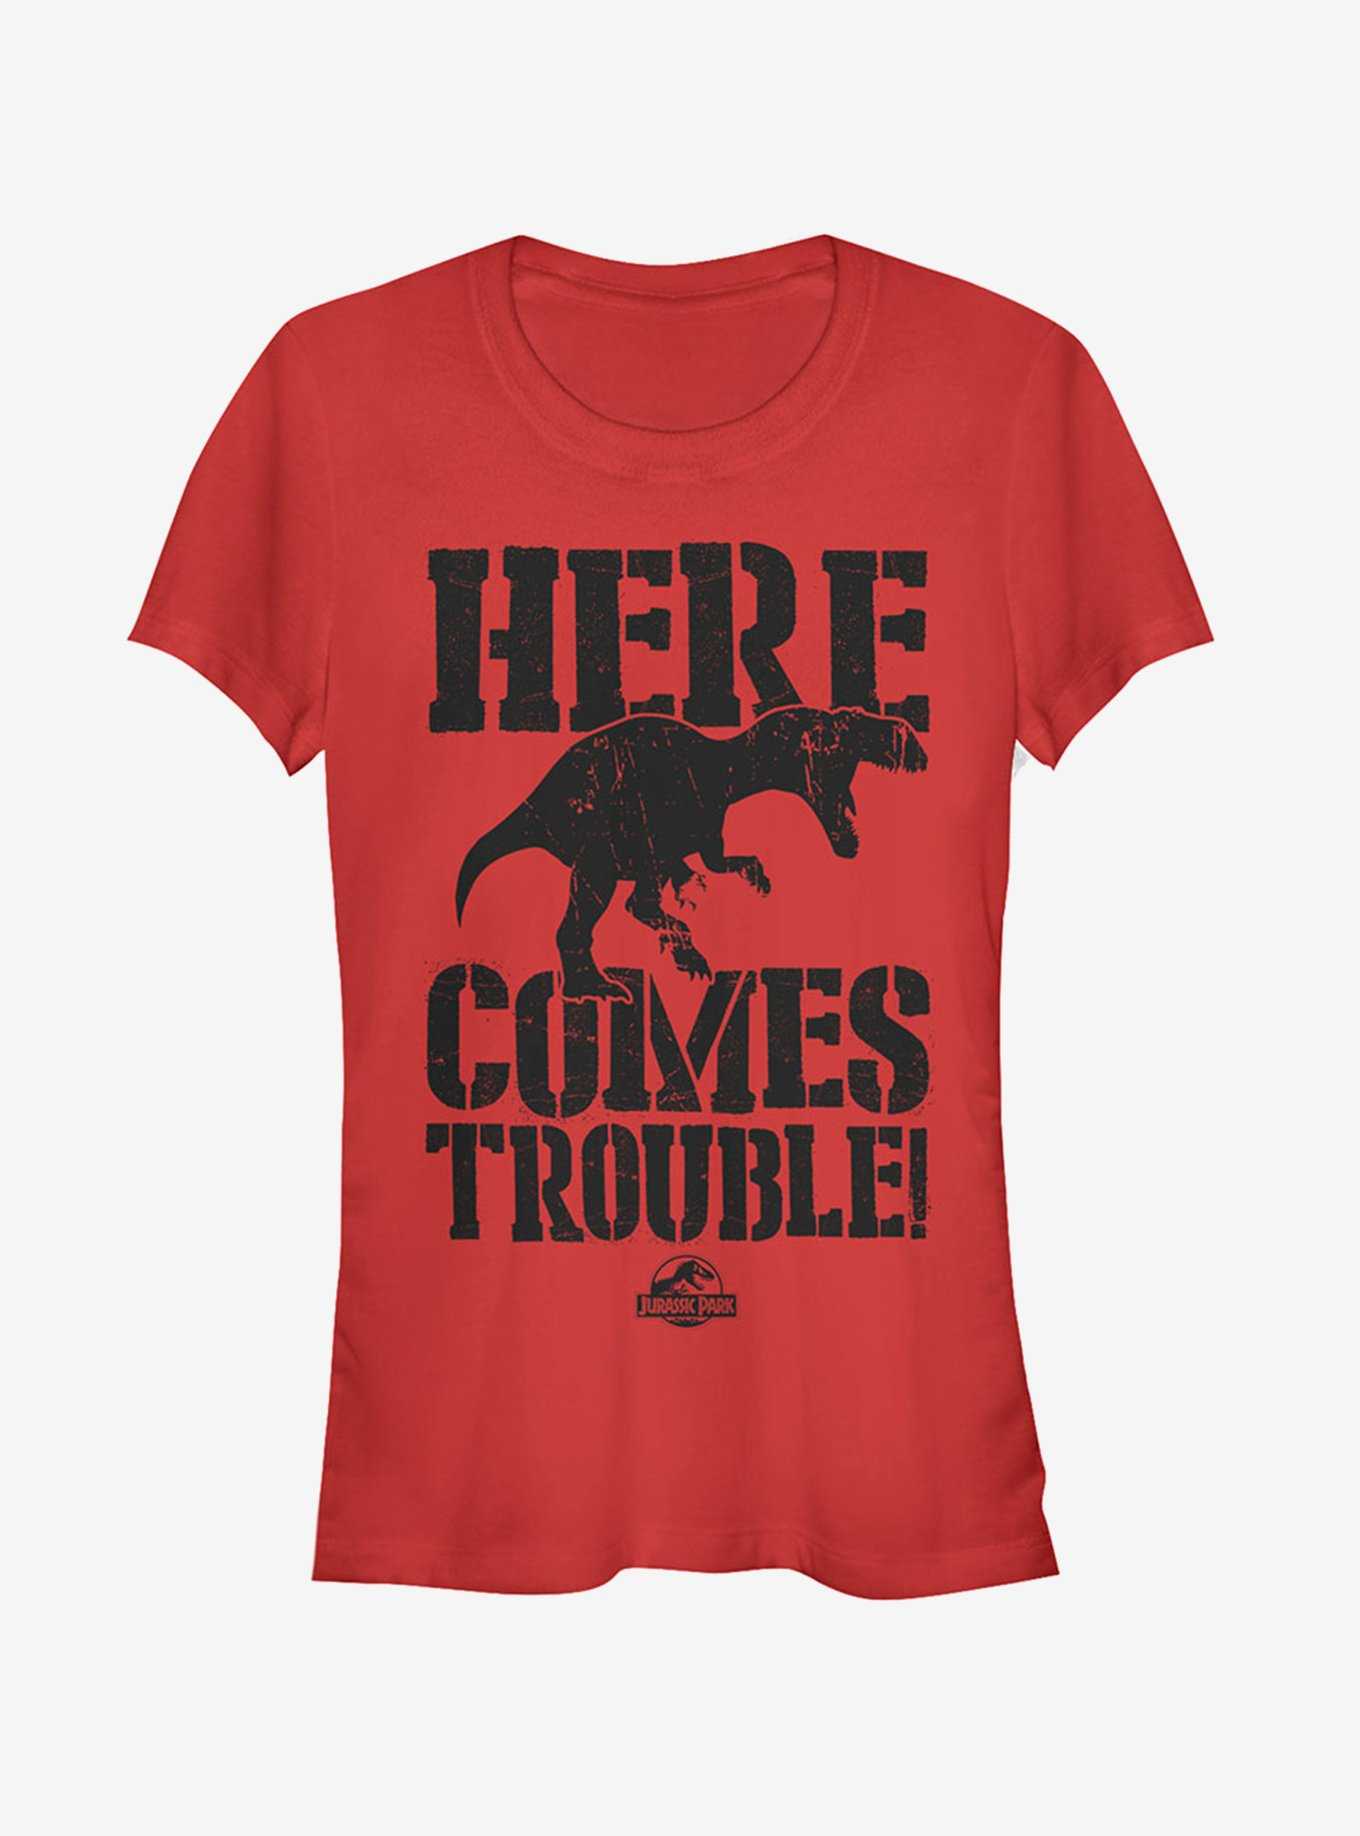 Here Comes Trouble Girls T-Shirt, , hi-res